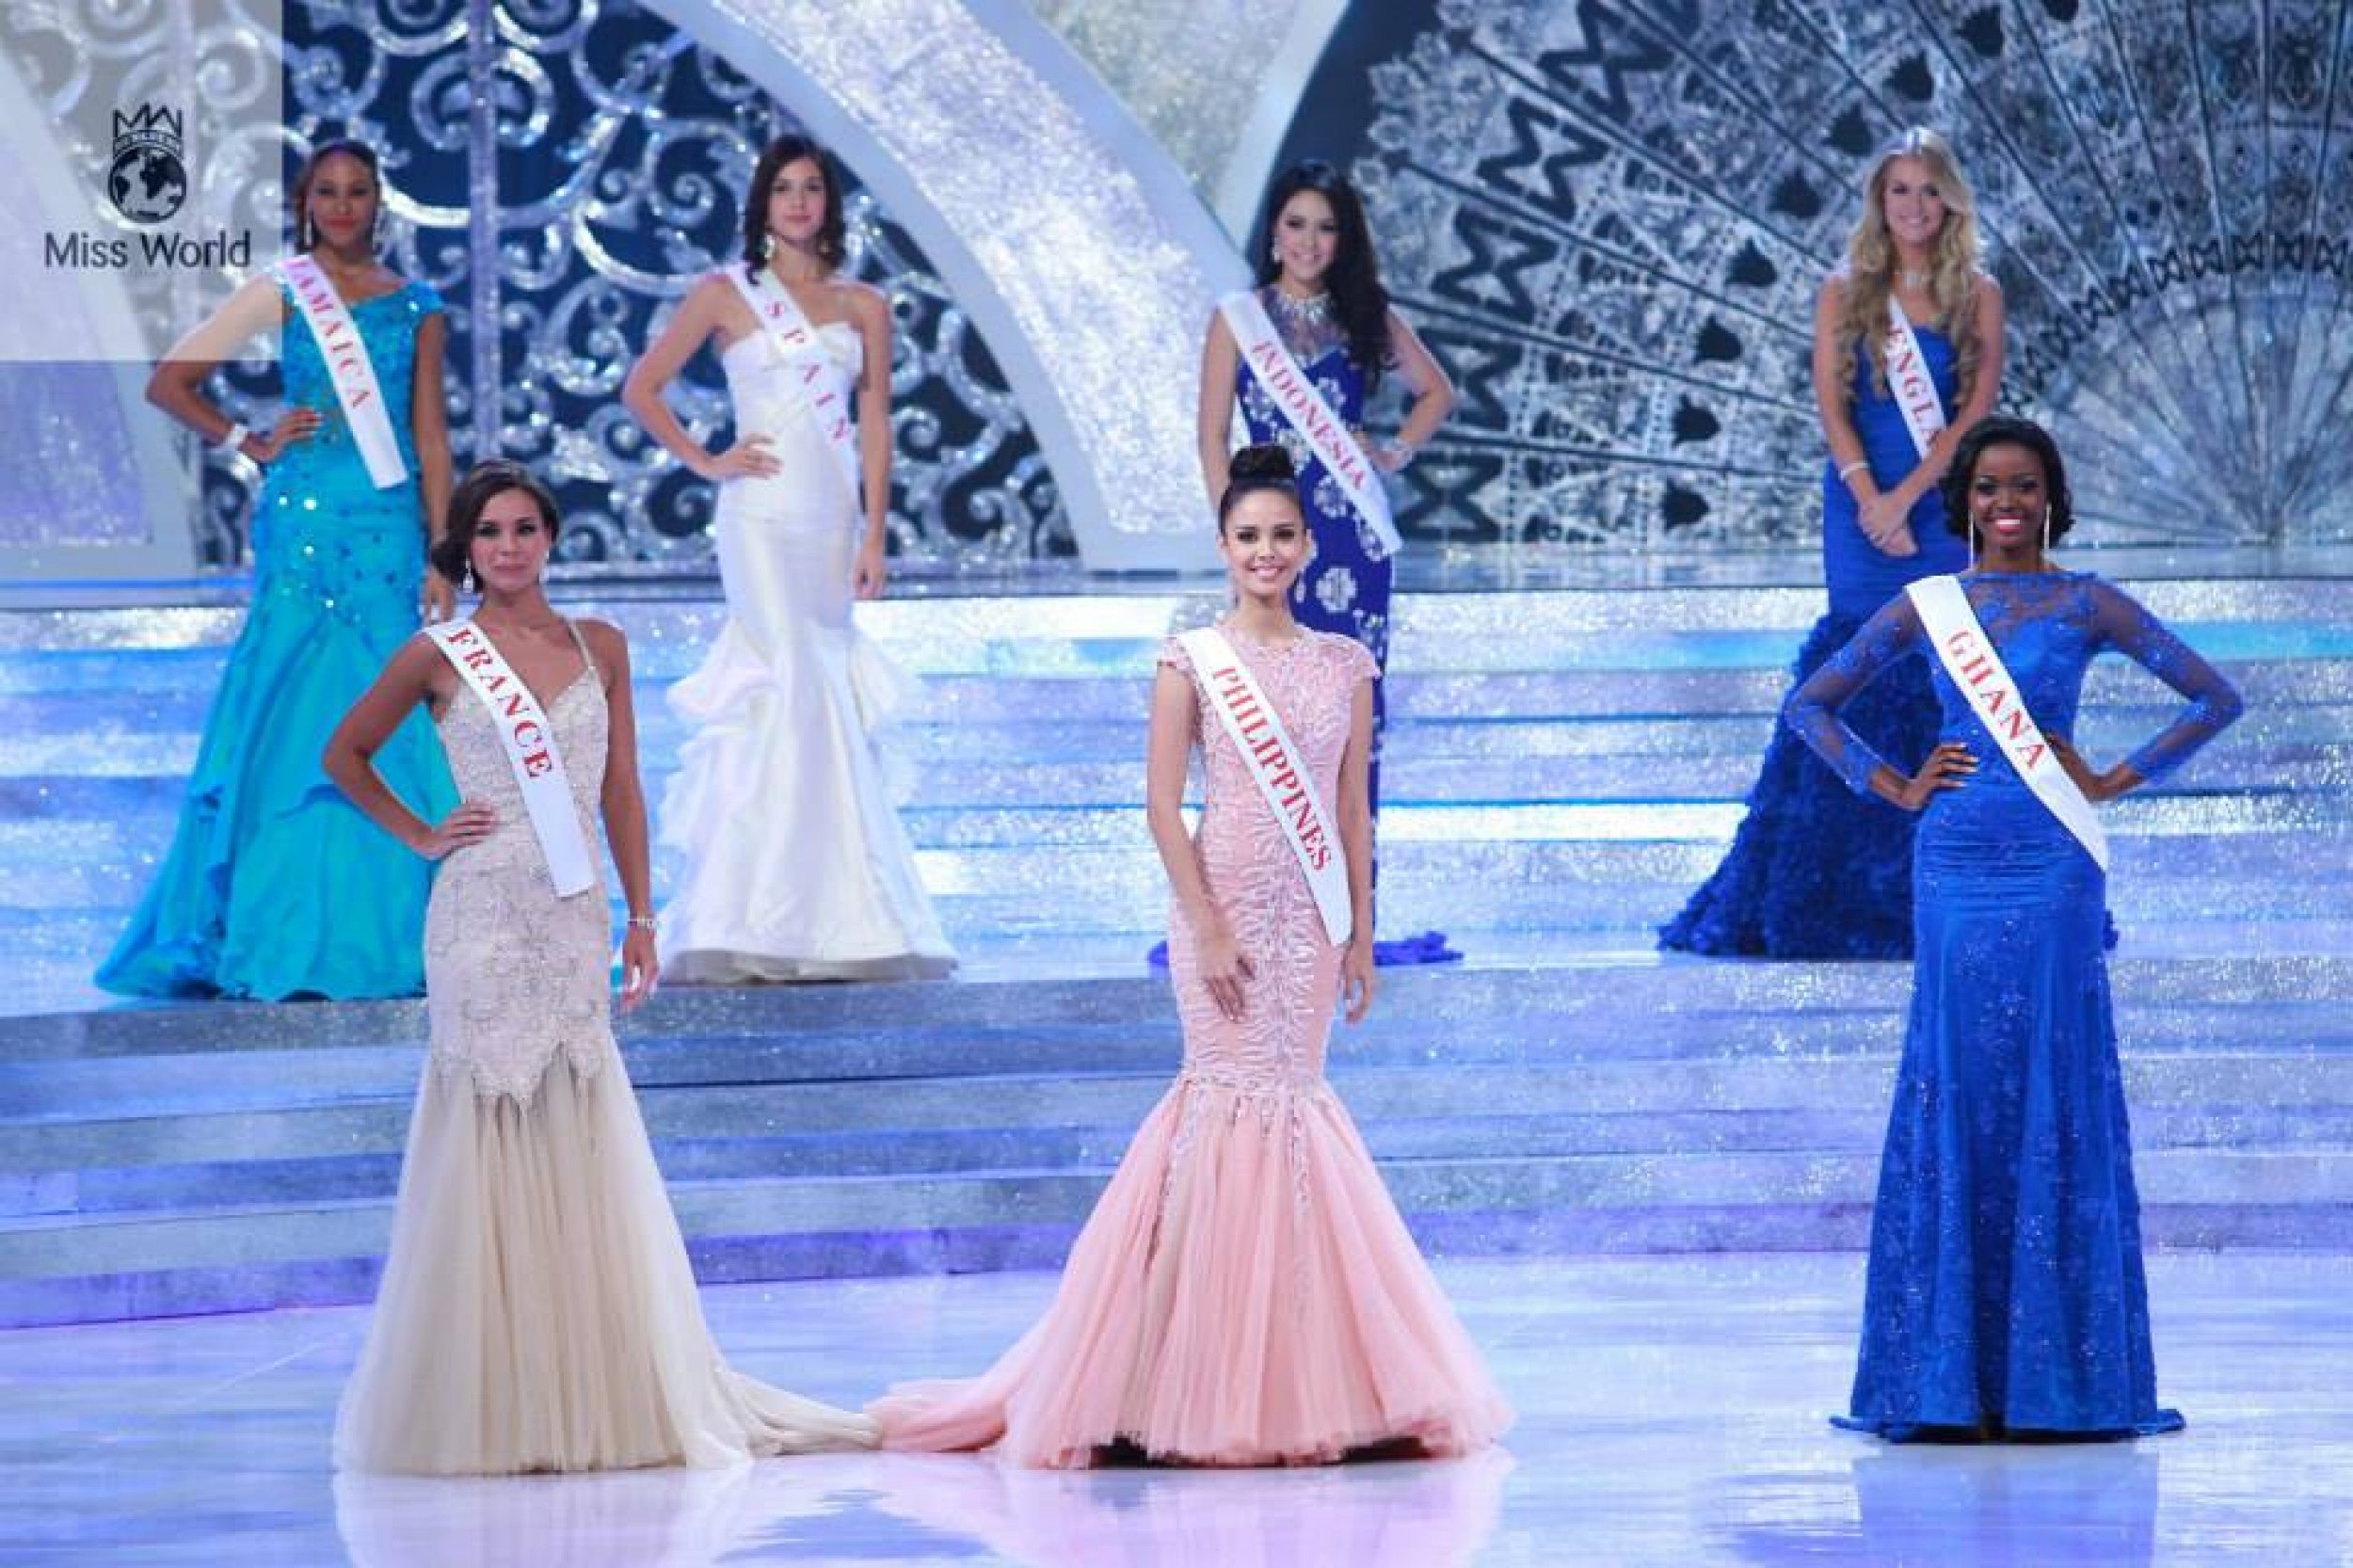 Miss World 2013 Winner Megan Young Miss Philippines Wins The Crown